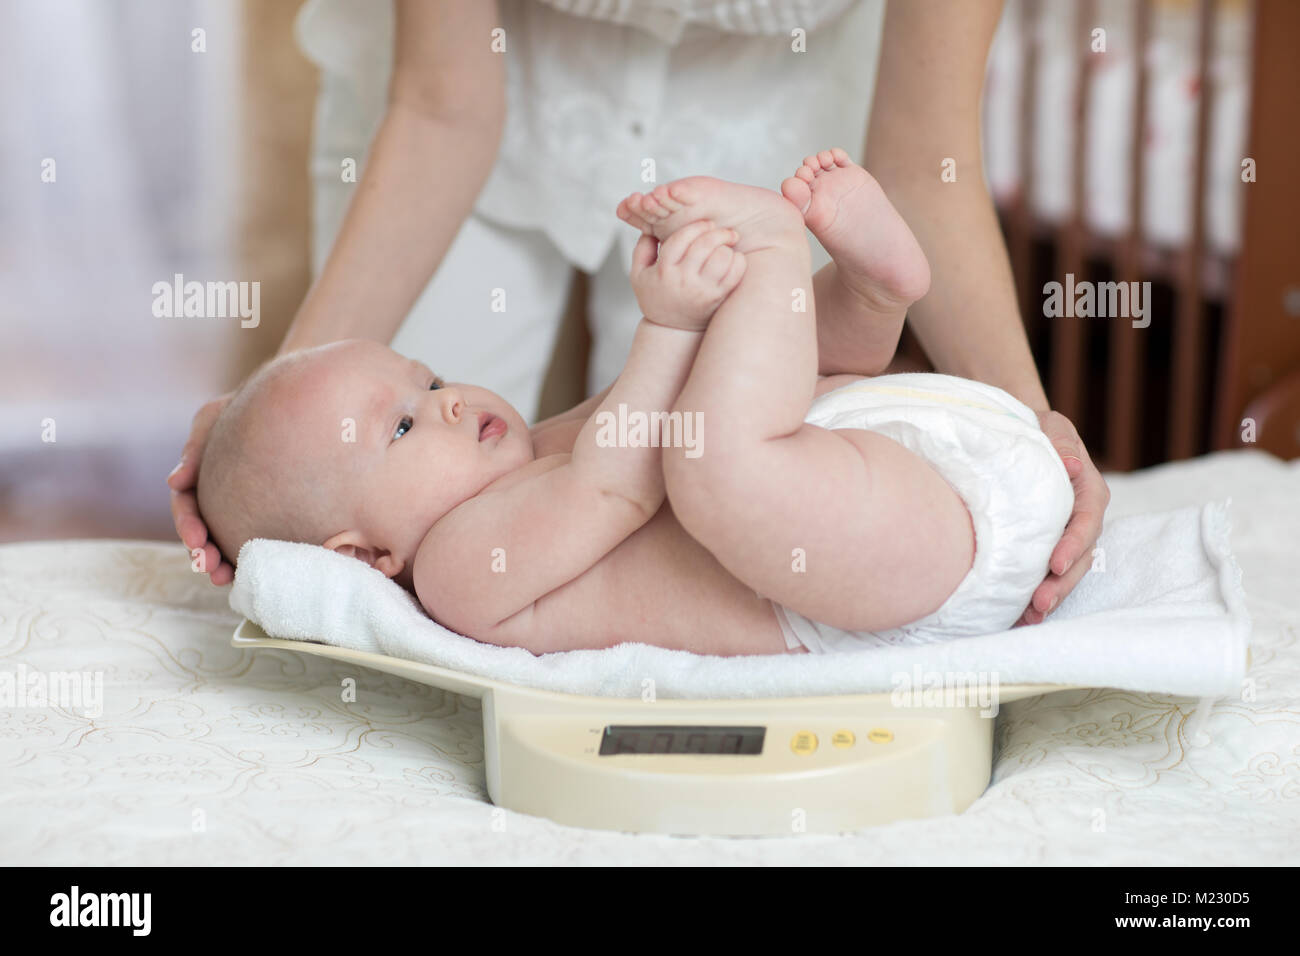 Mommy is measuring baby weigh on scales at home Stock Photo